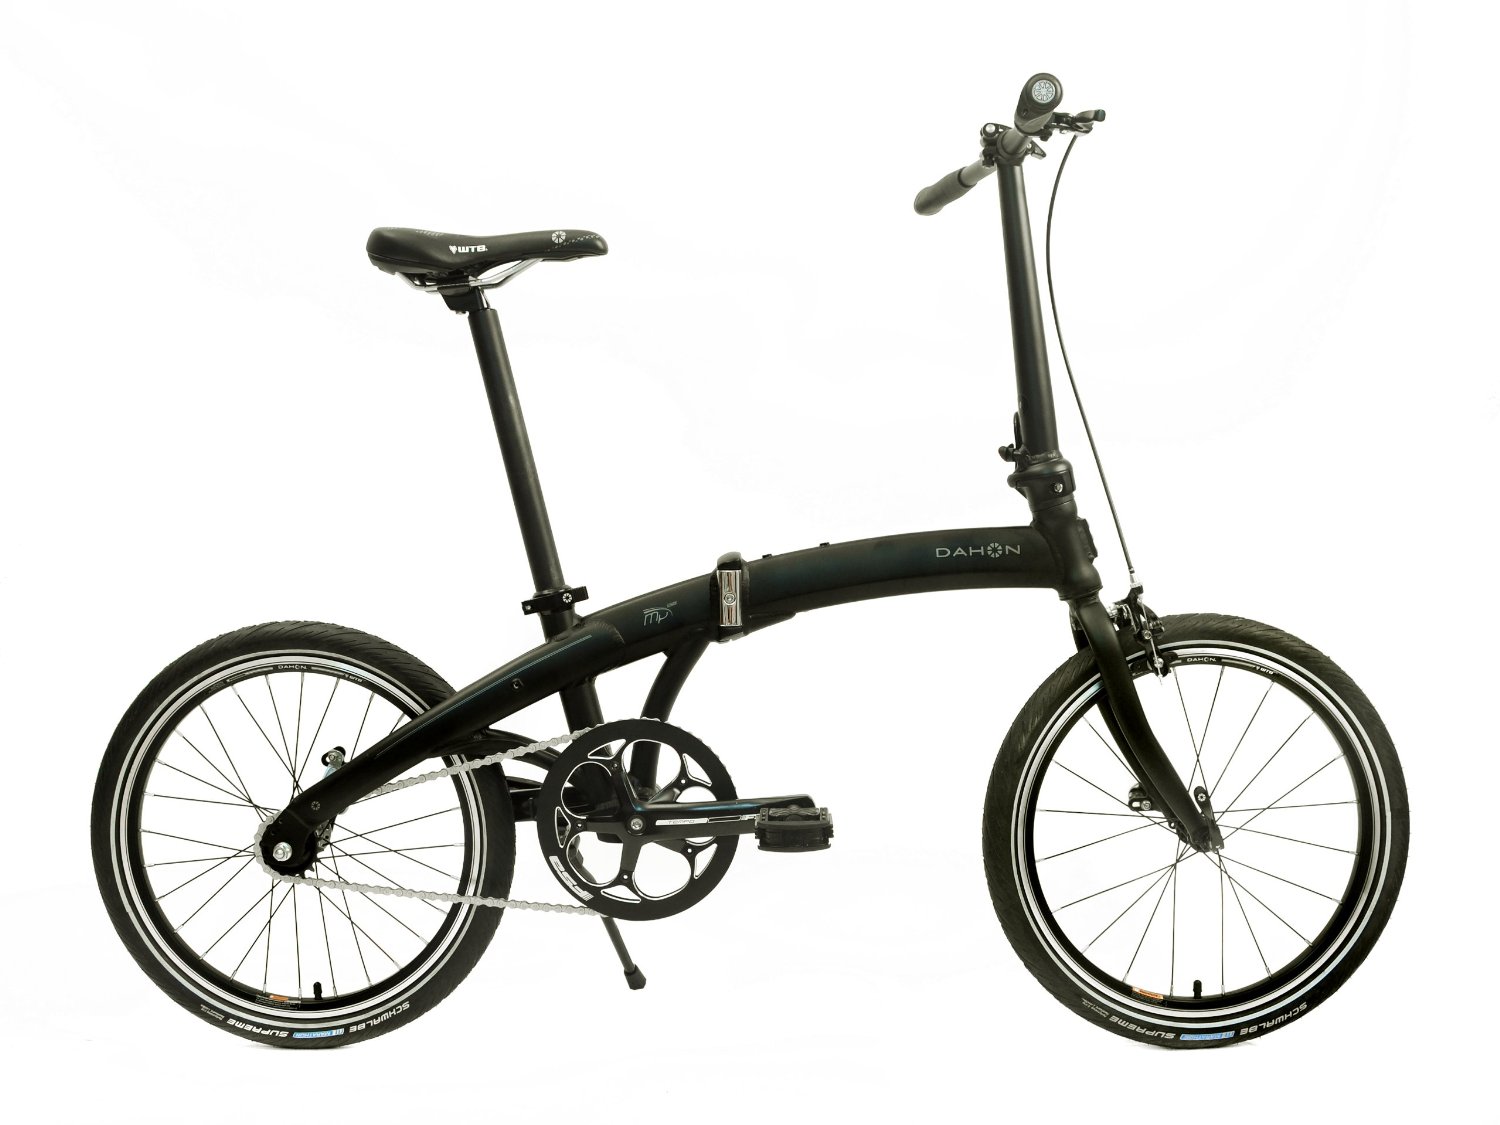 lightspeed electric cycle price